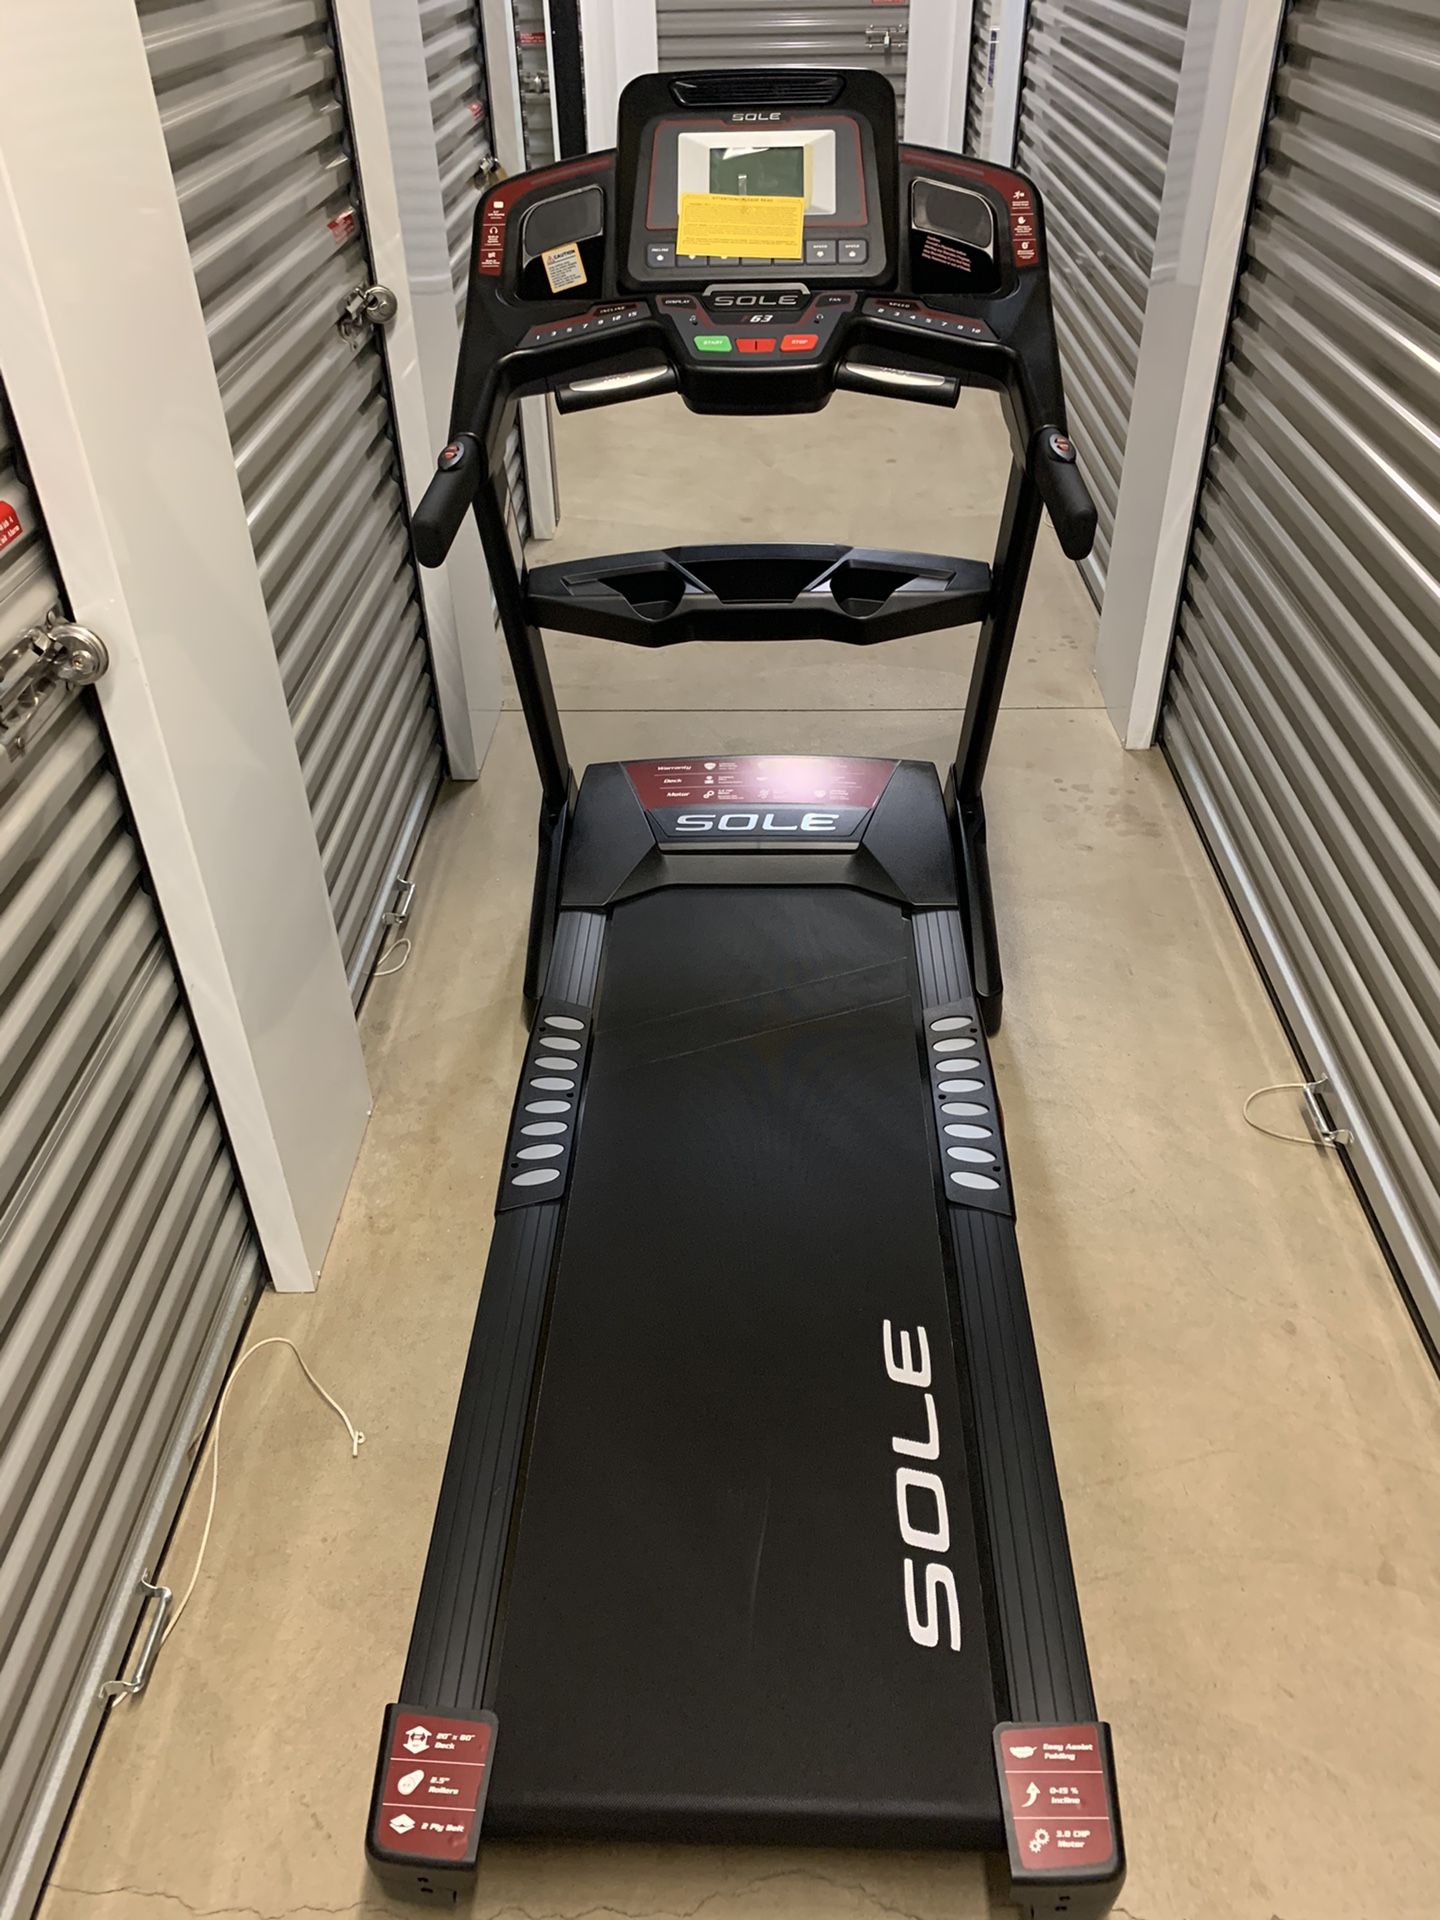 SOLE F63 TREADMILL - USED ONCE - NEED GONE TODAY